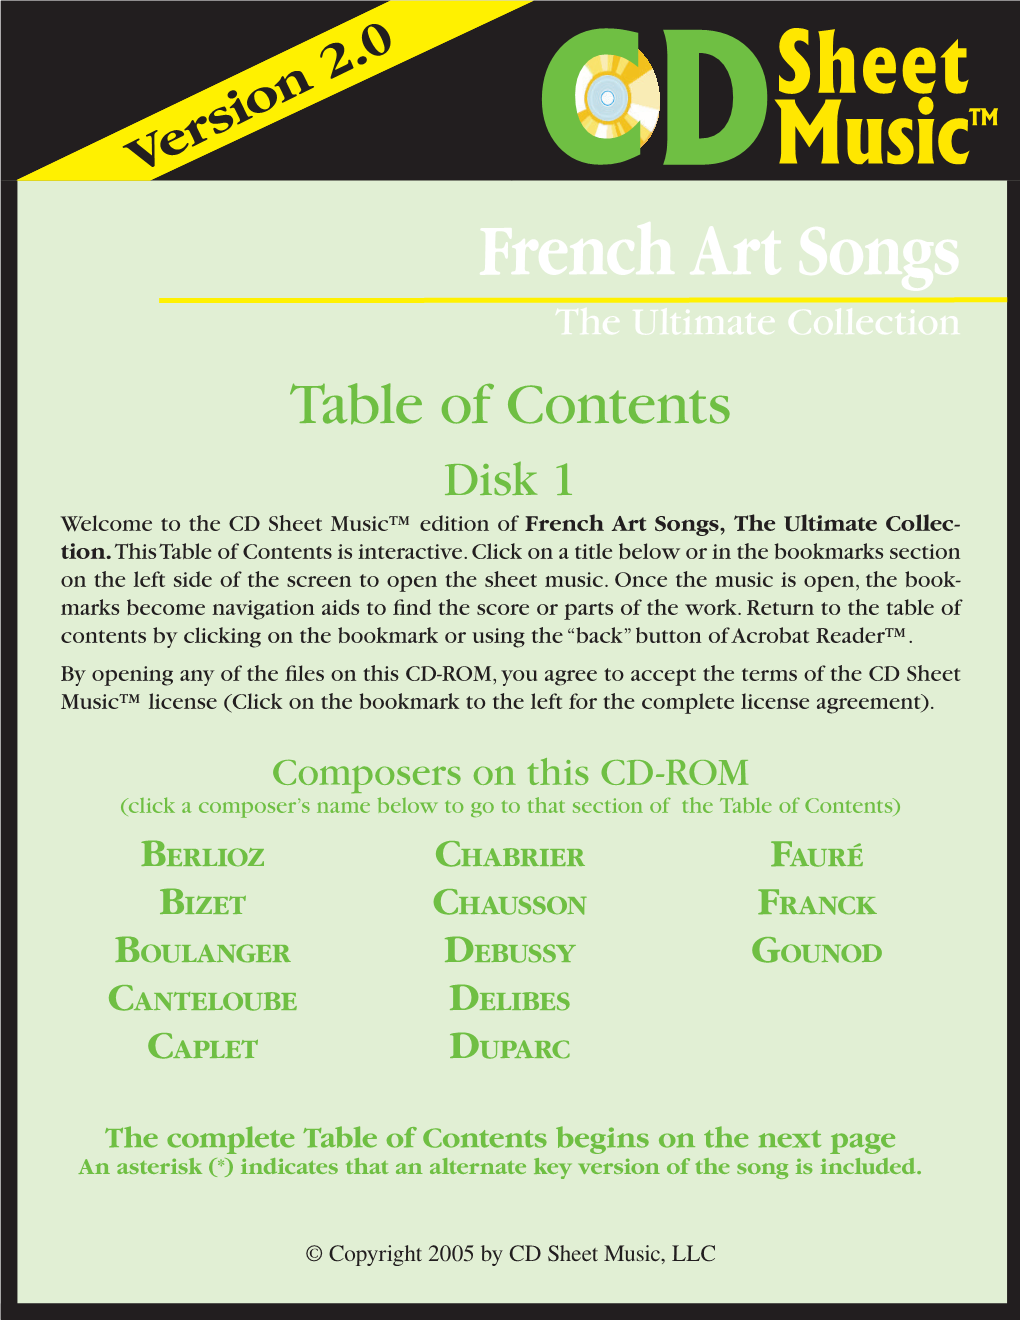 Table of Contents Disk 1 Welcome to the CD Sheet Music™ Edition of French Art Songs, the Ultimate Collec- Tion